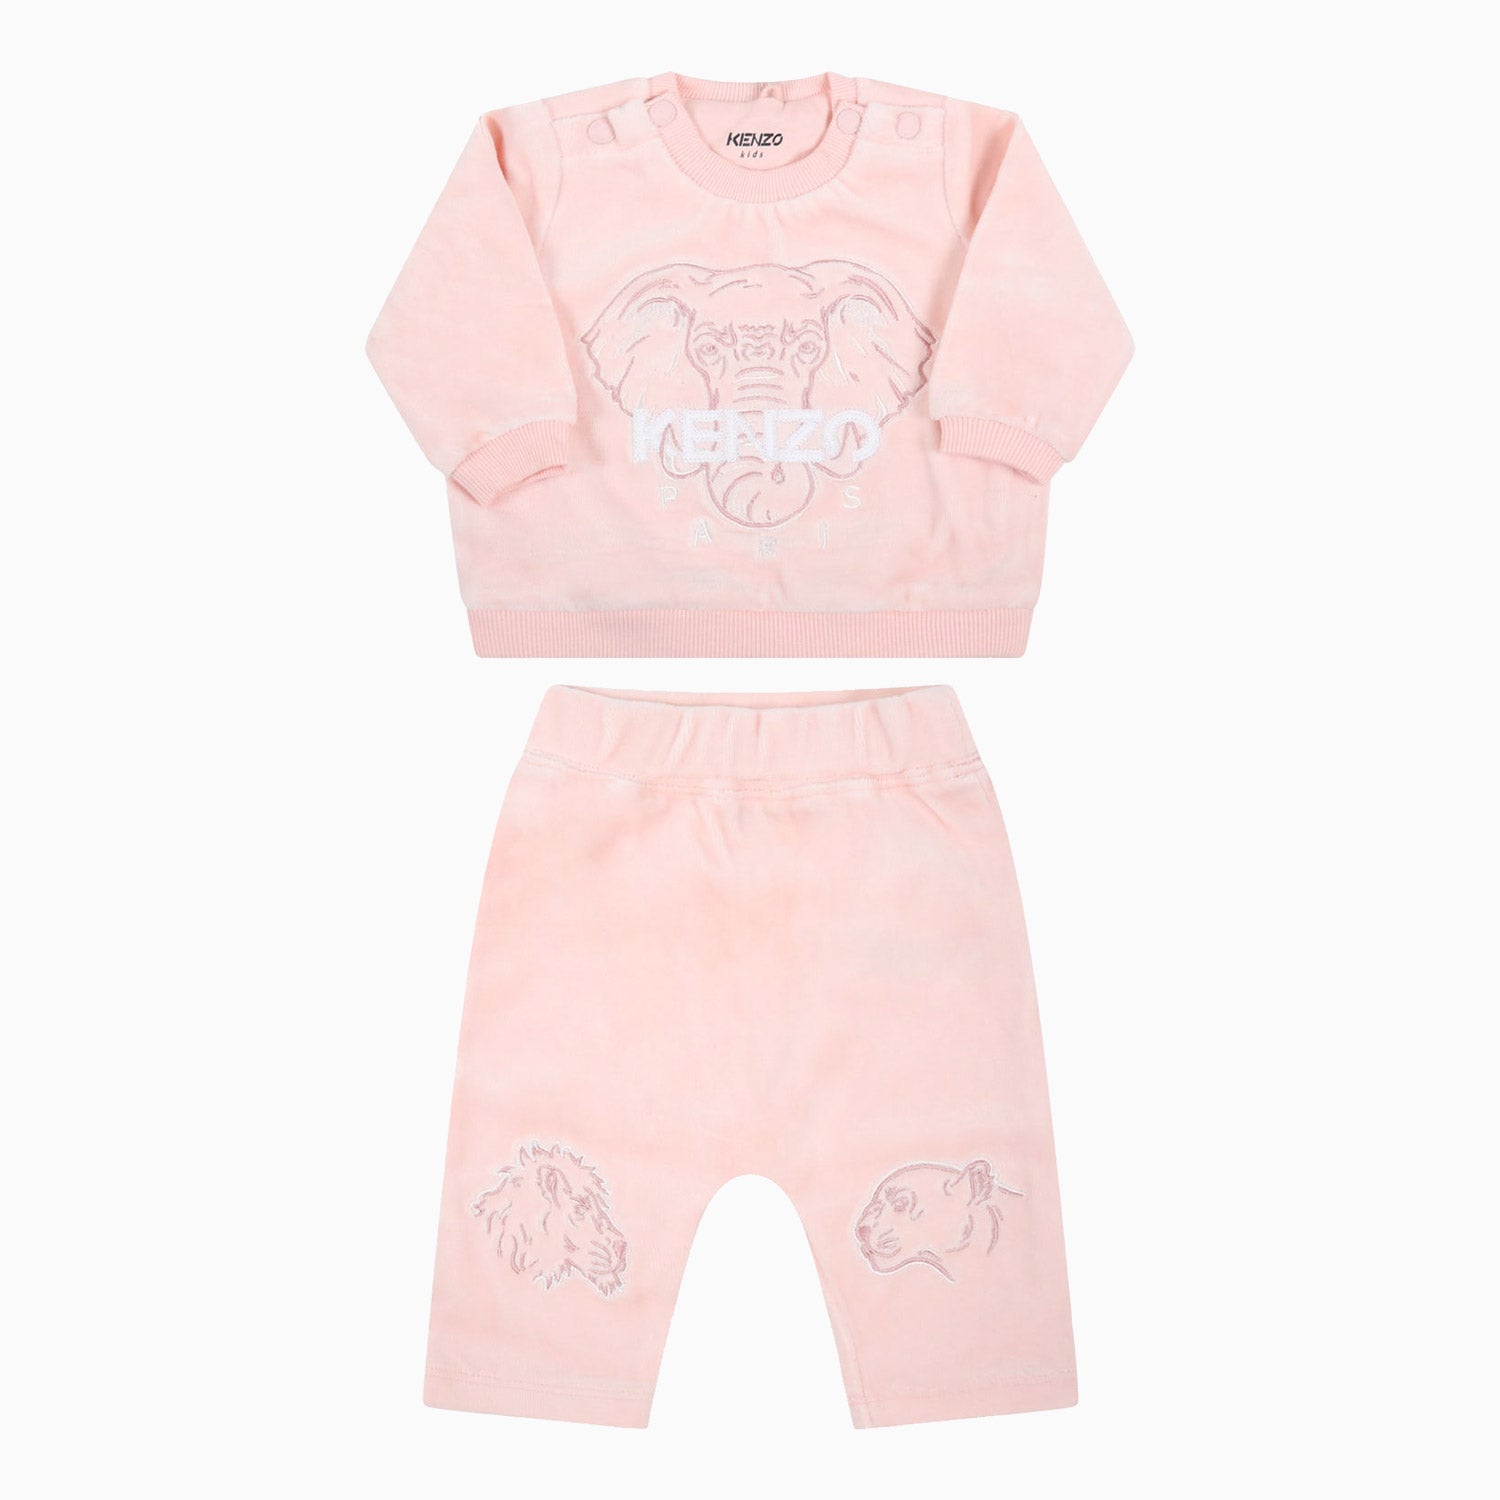 Kenzo Kid's Elephant Logo Outfit - Color: Pink - Kids Premium Clothing -